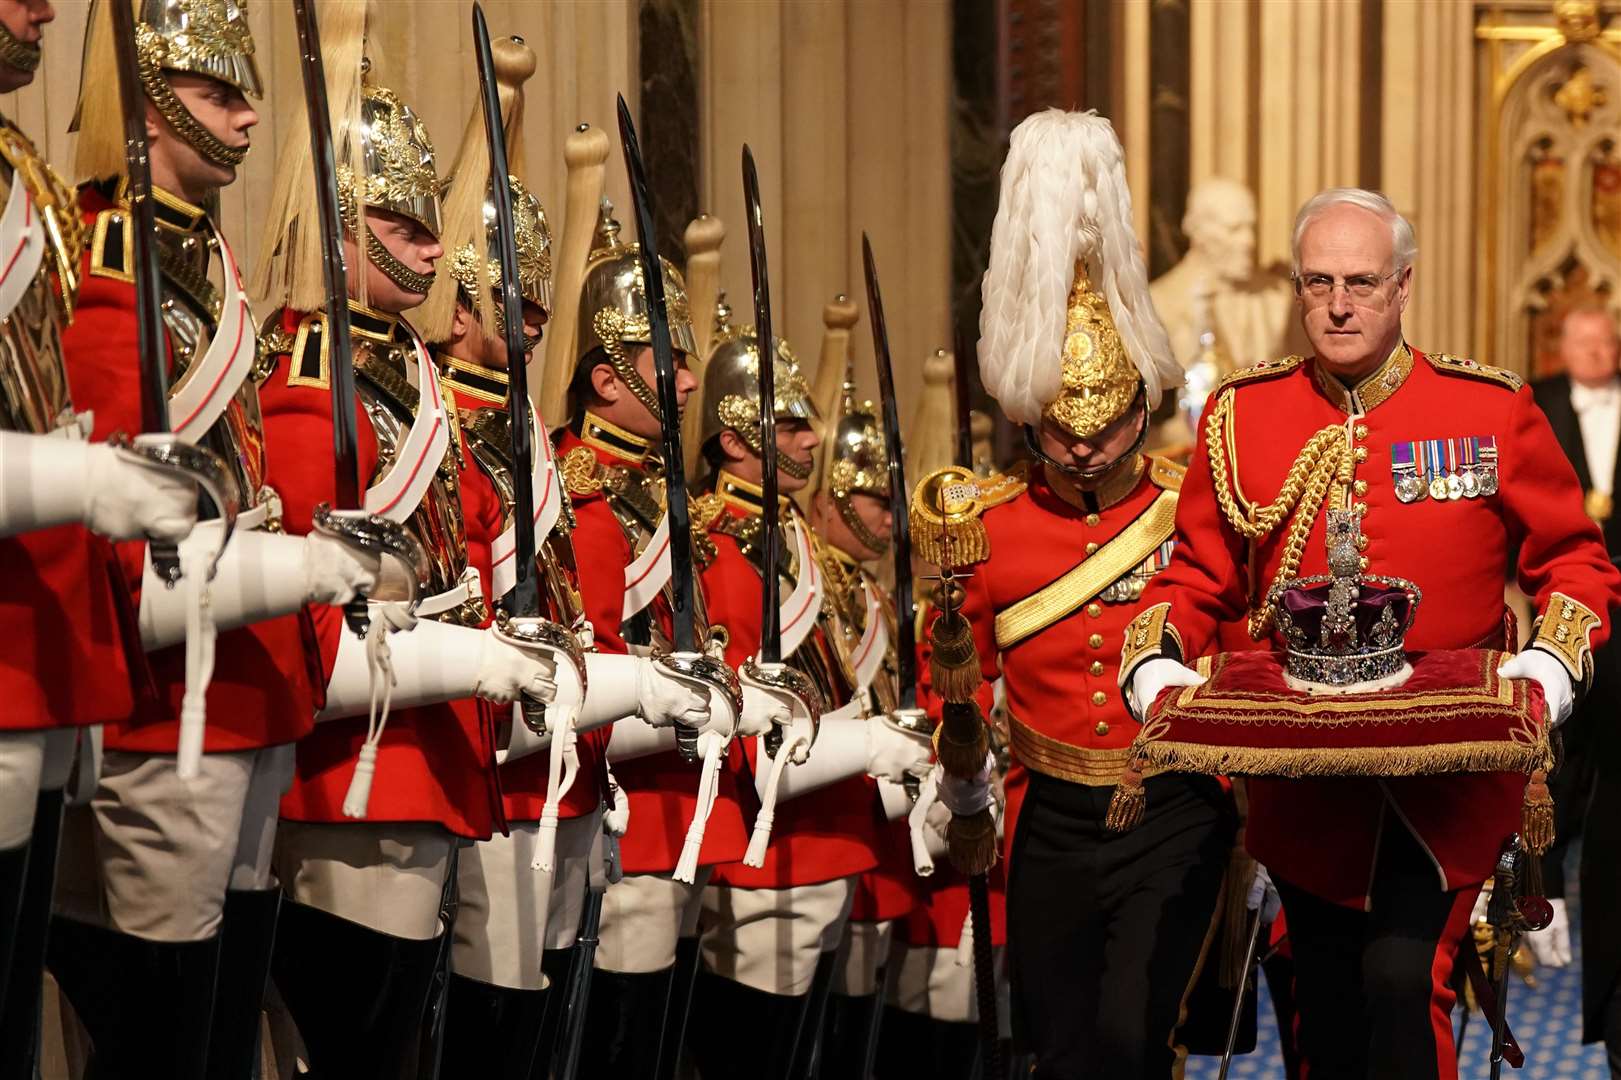 The Imperial State Crown is carried through the Norman Porch for the State Opening of Parliament in the House of Lords at the Palace of Westminster (Aaron Chown/PA)